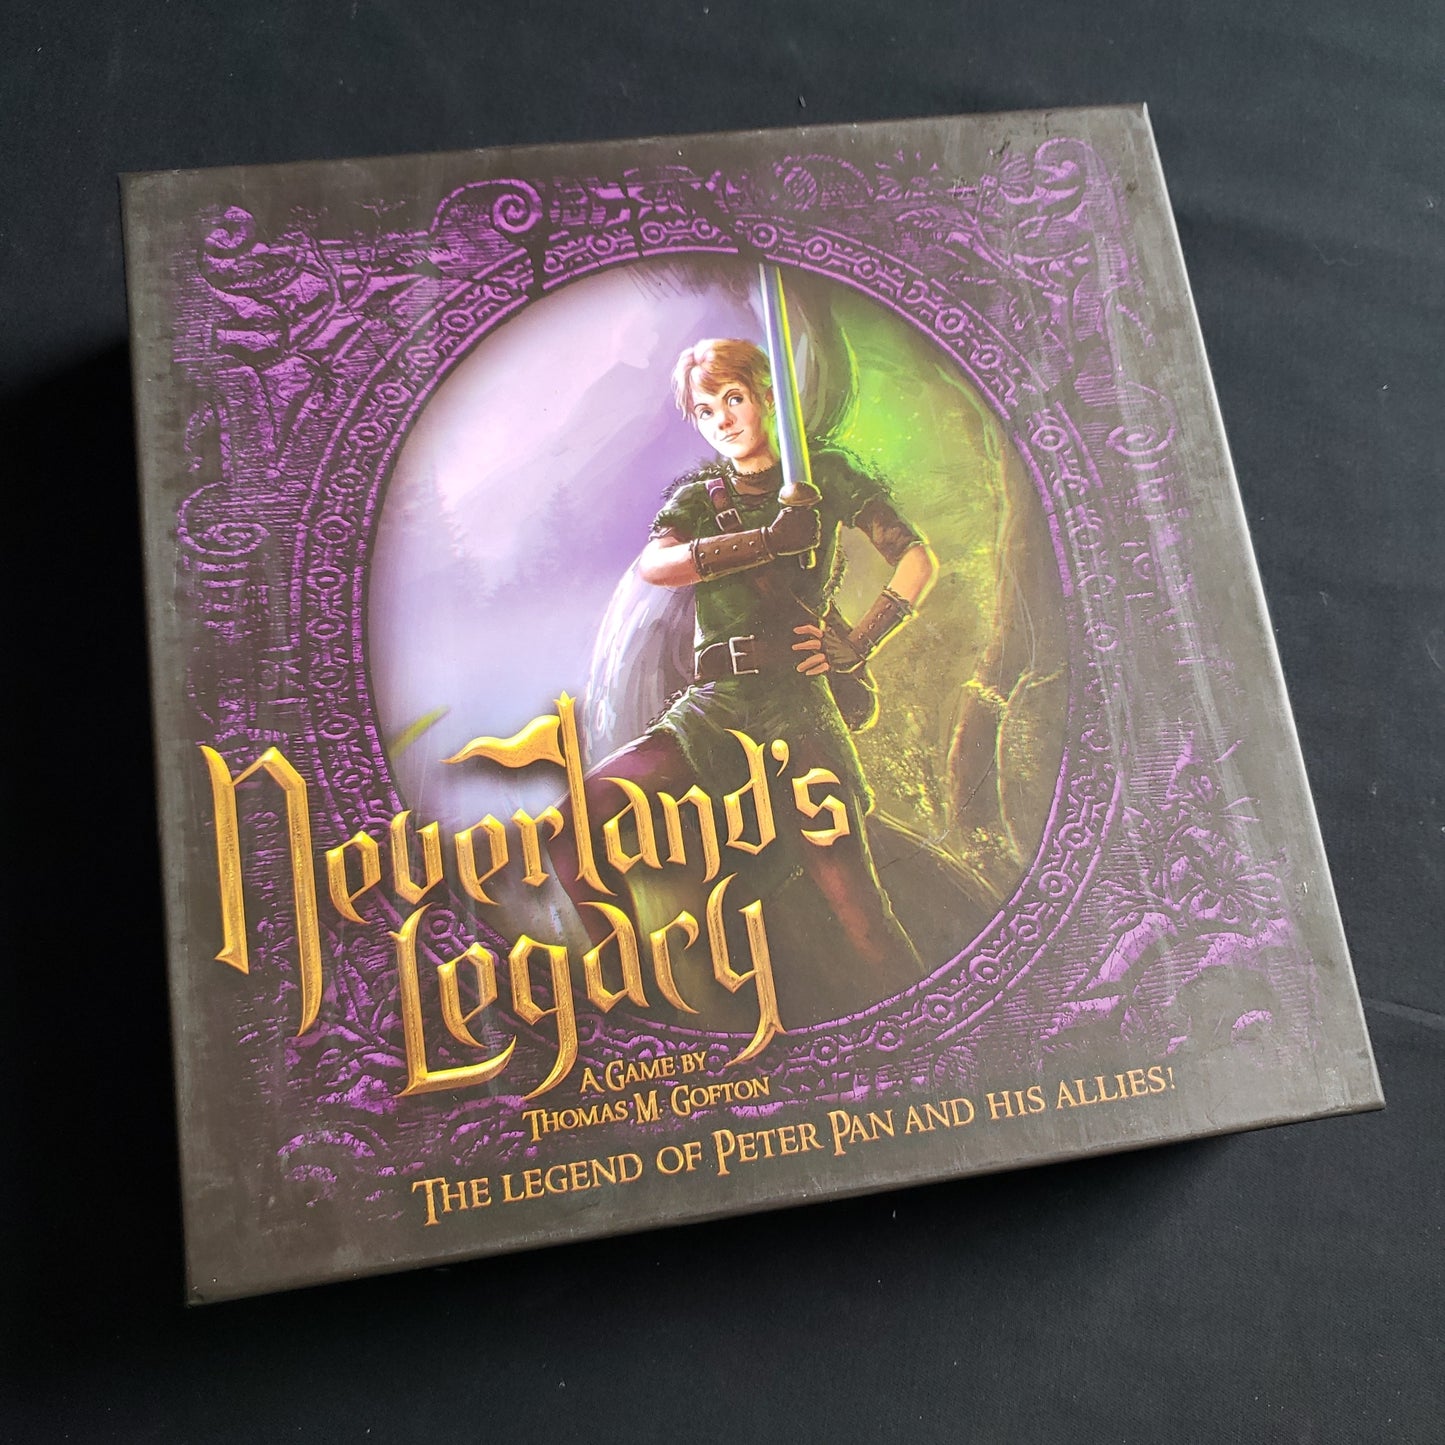 Image shows the front cover of the box of the Neverland's Legacy board game